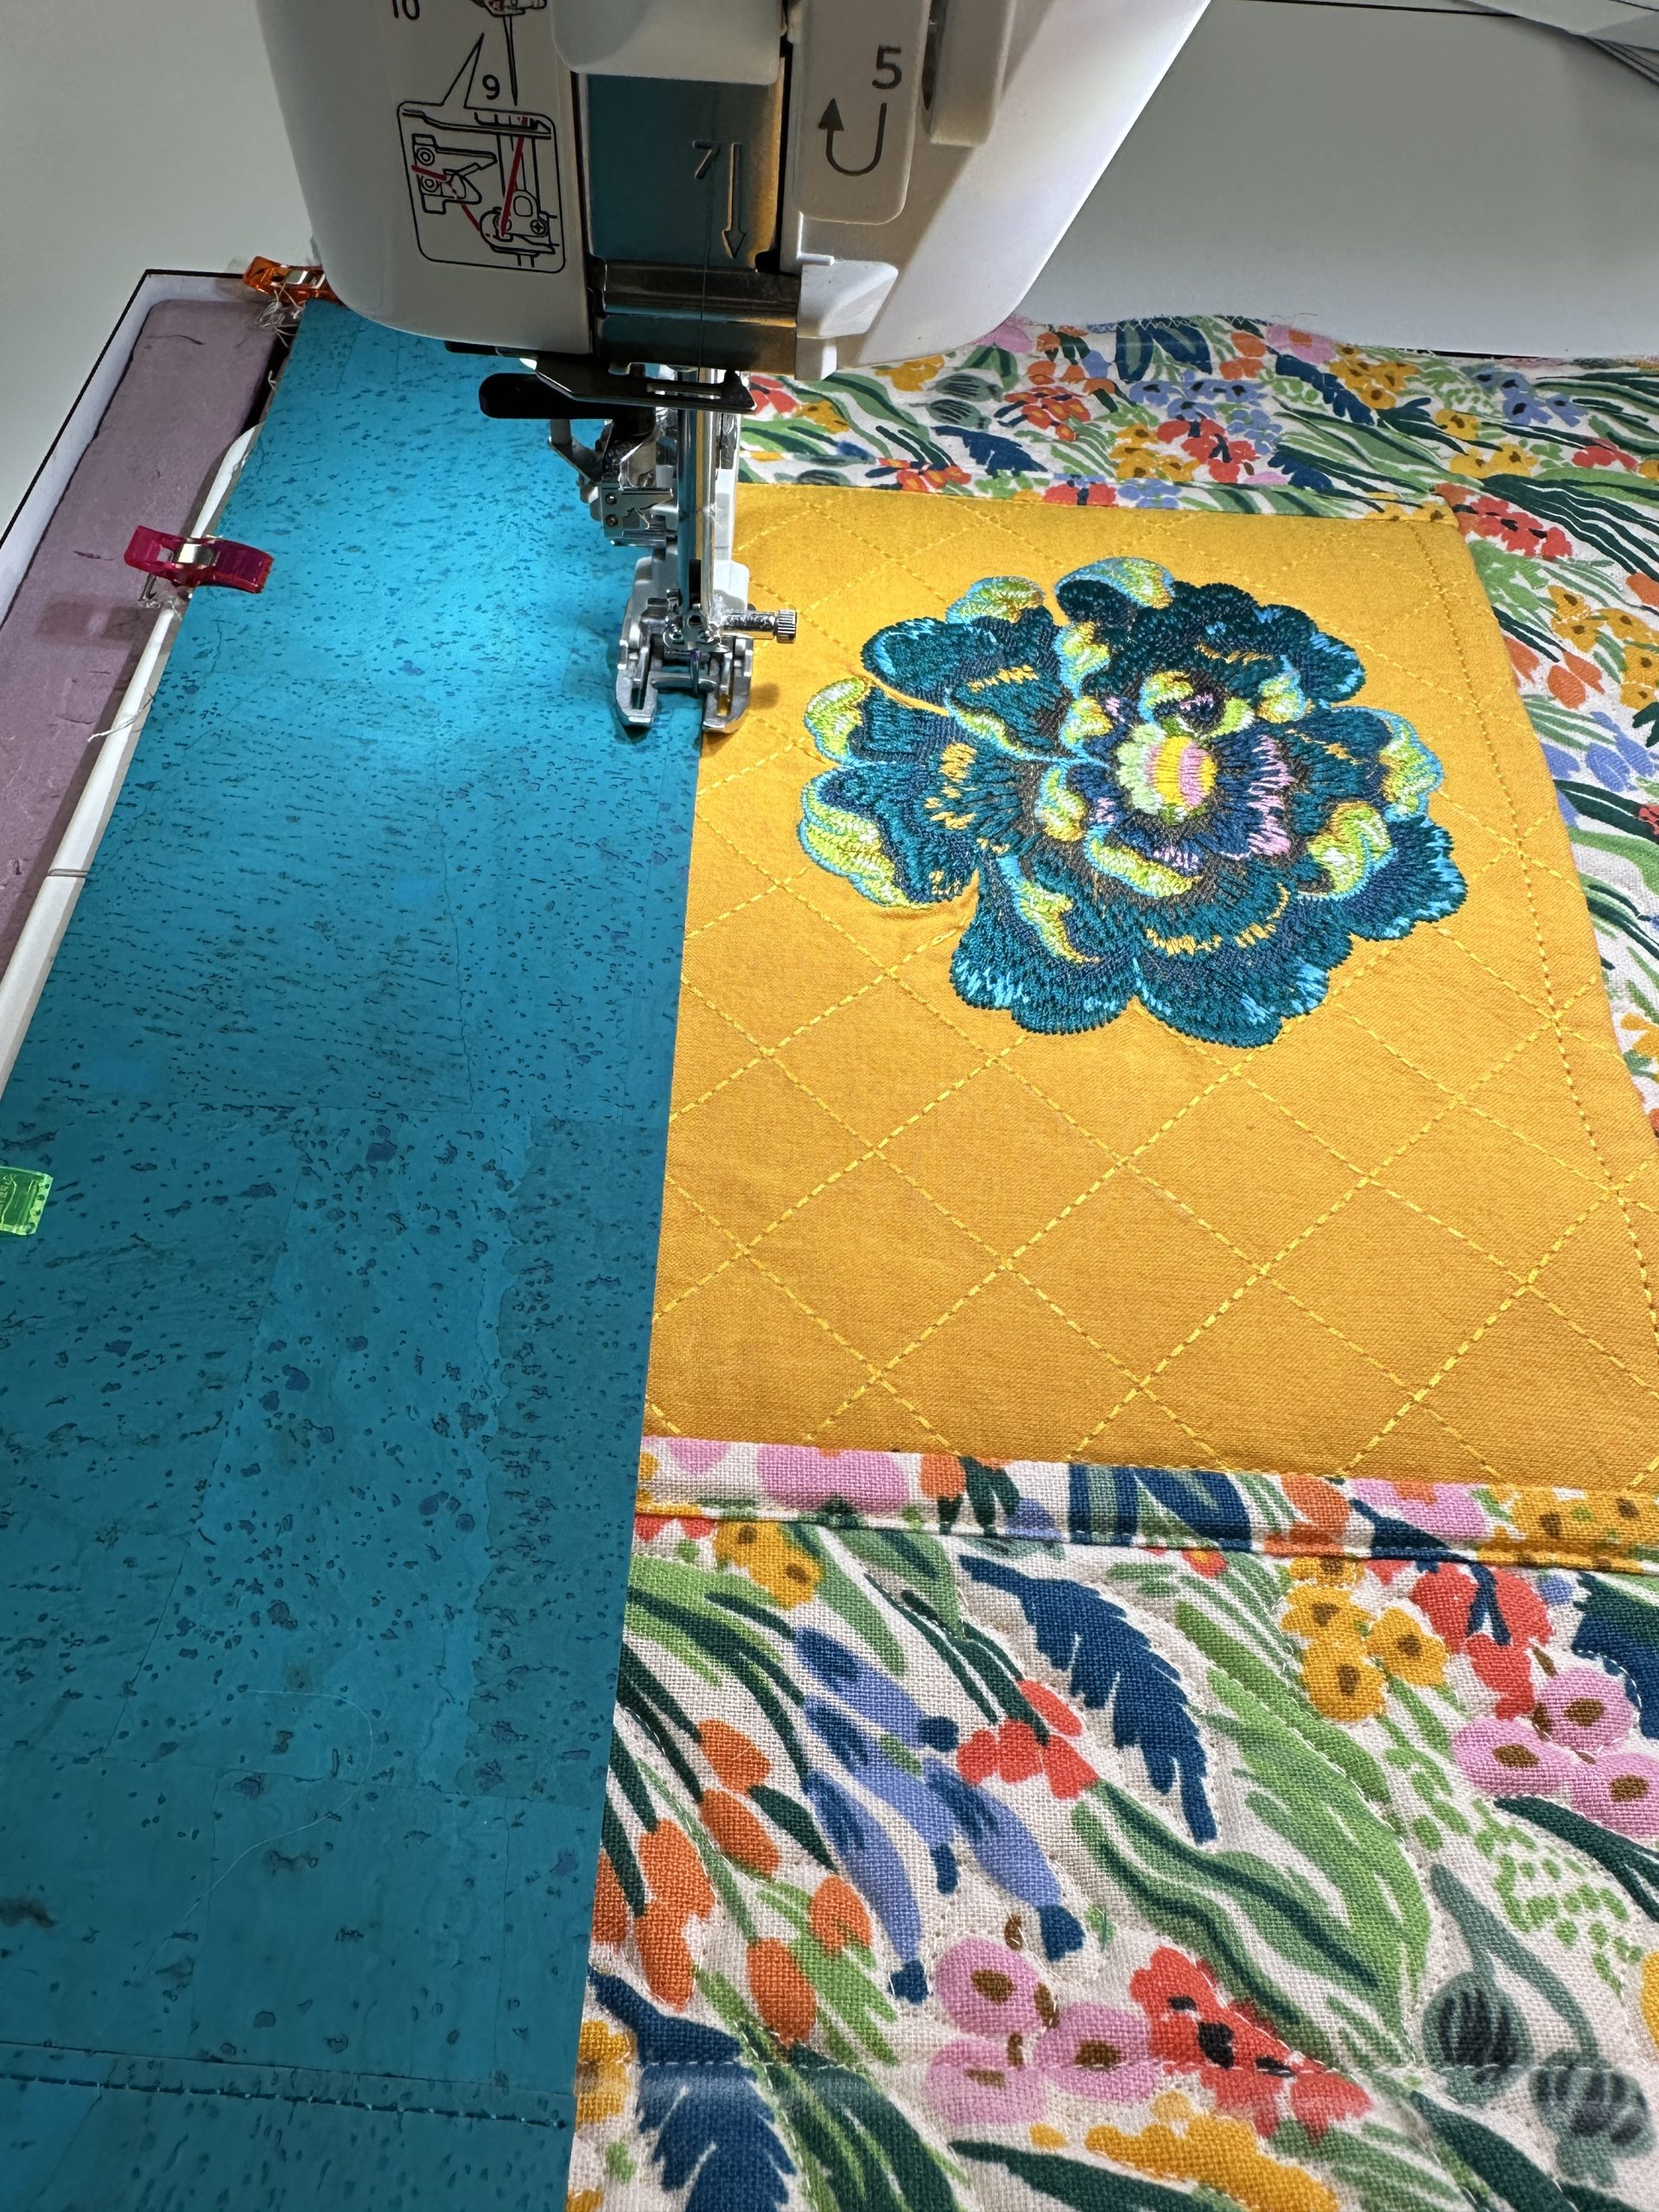 Less Bitching, More Stitching! - A Fiber Arts Blog: Product Review/Free  Giveaway - Q-Snap Frame for Needlework